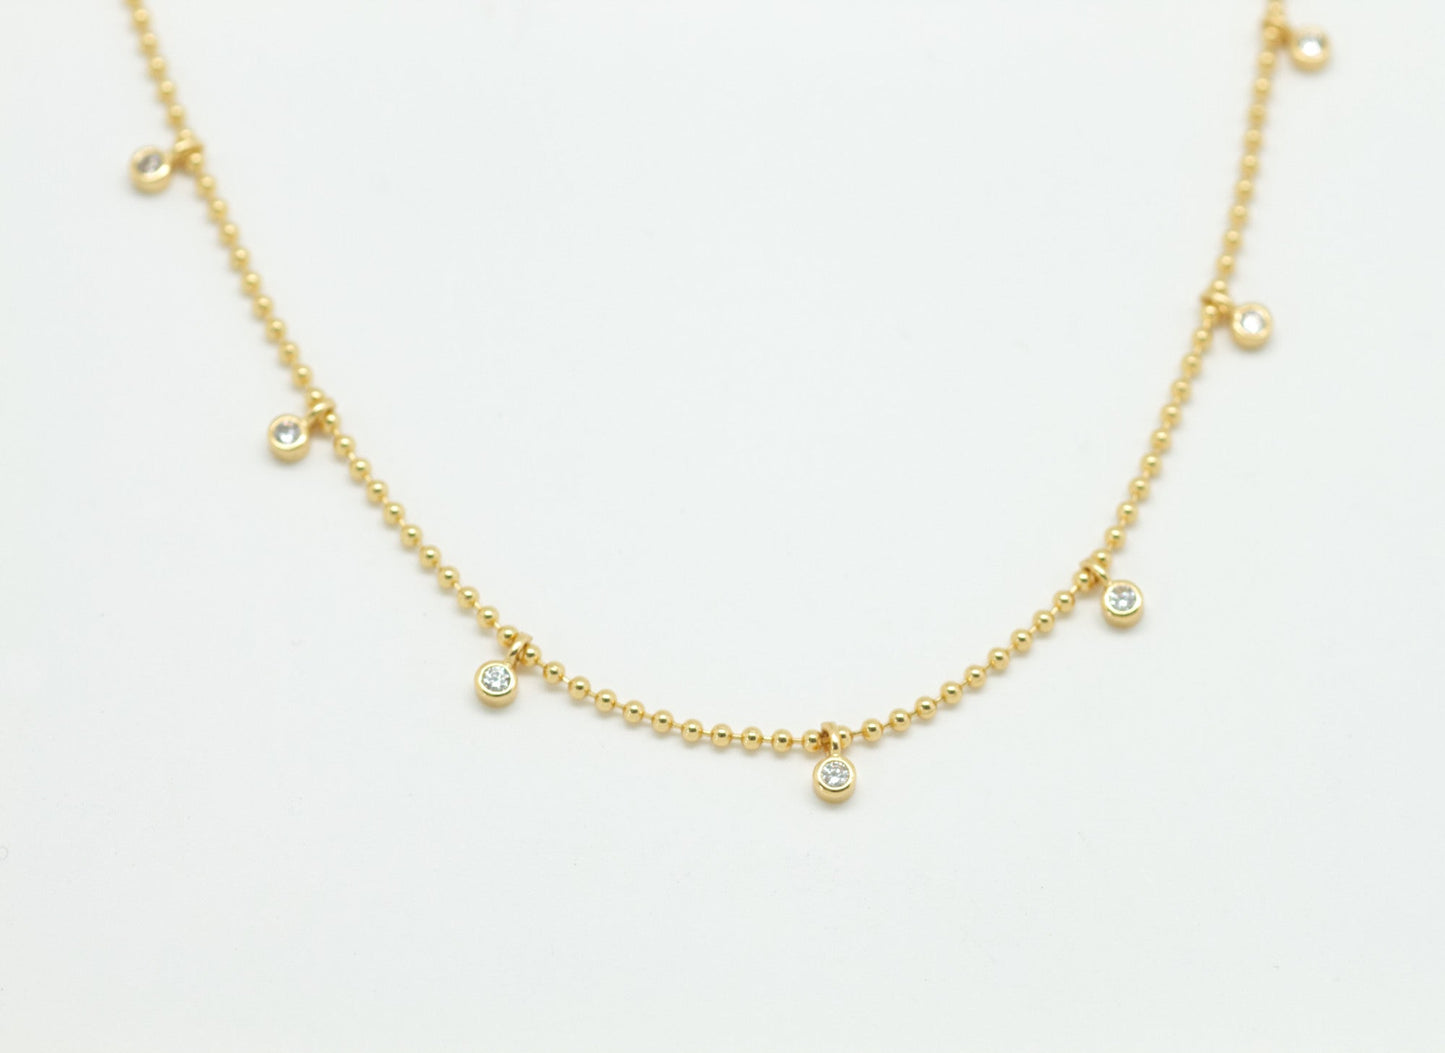 Salty Cali Bliss Necklace - Gold